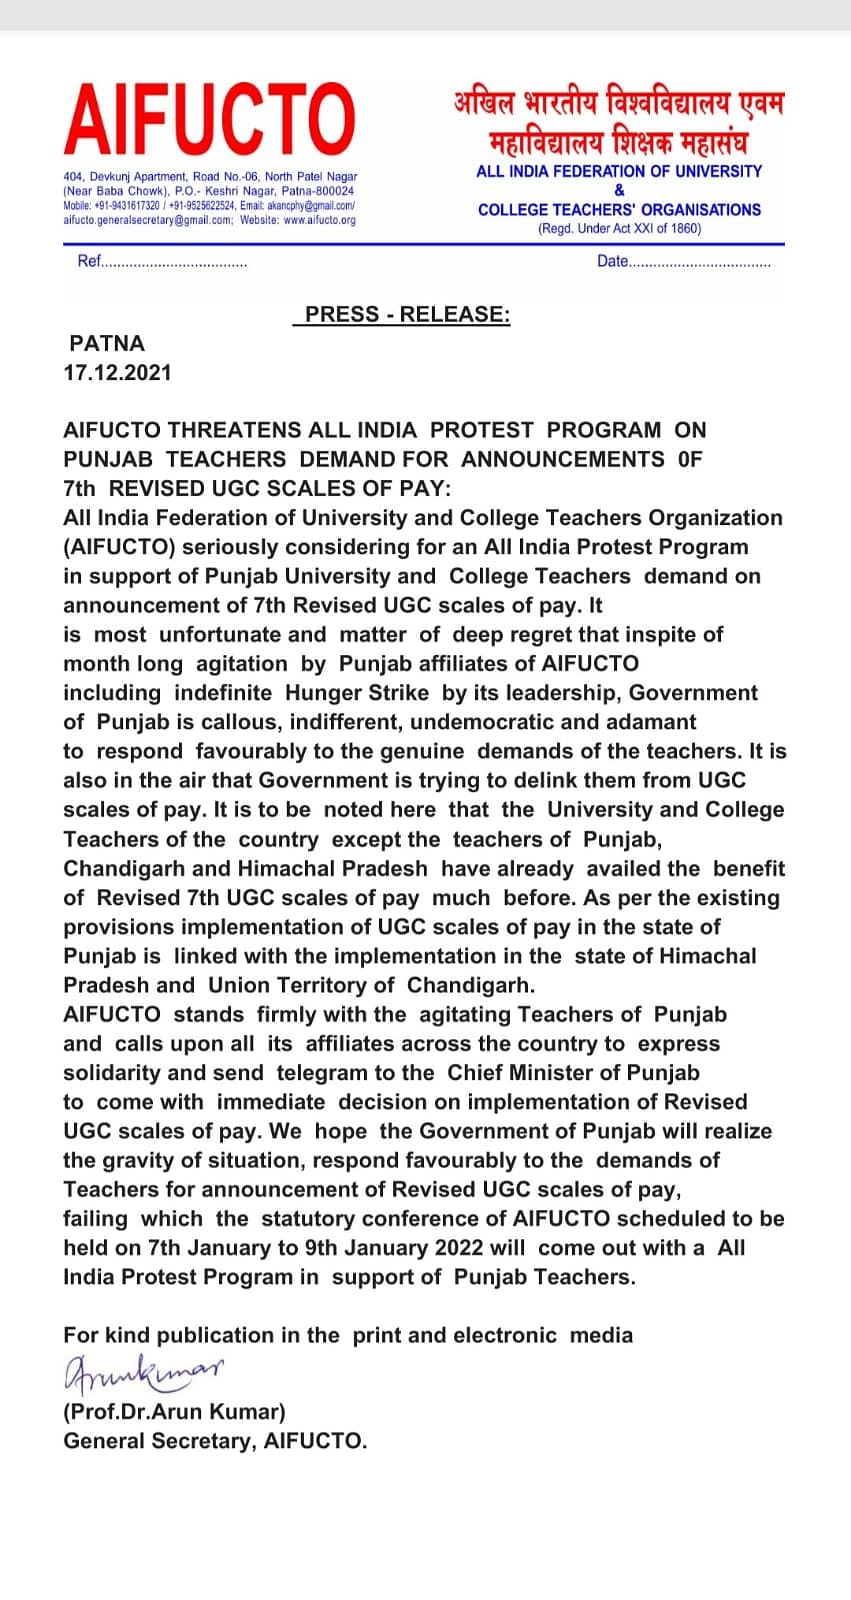 The teachers have two demands: the implementation of 7th pay scale and prevent de-linking of UGC pay scales.  